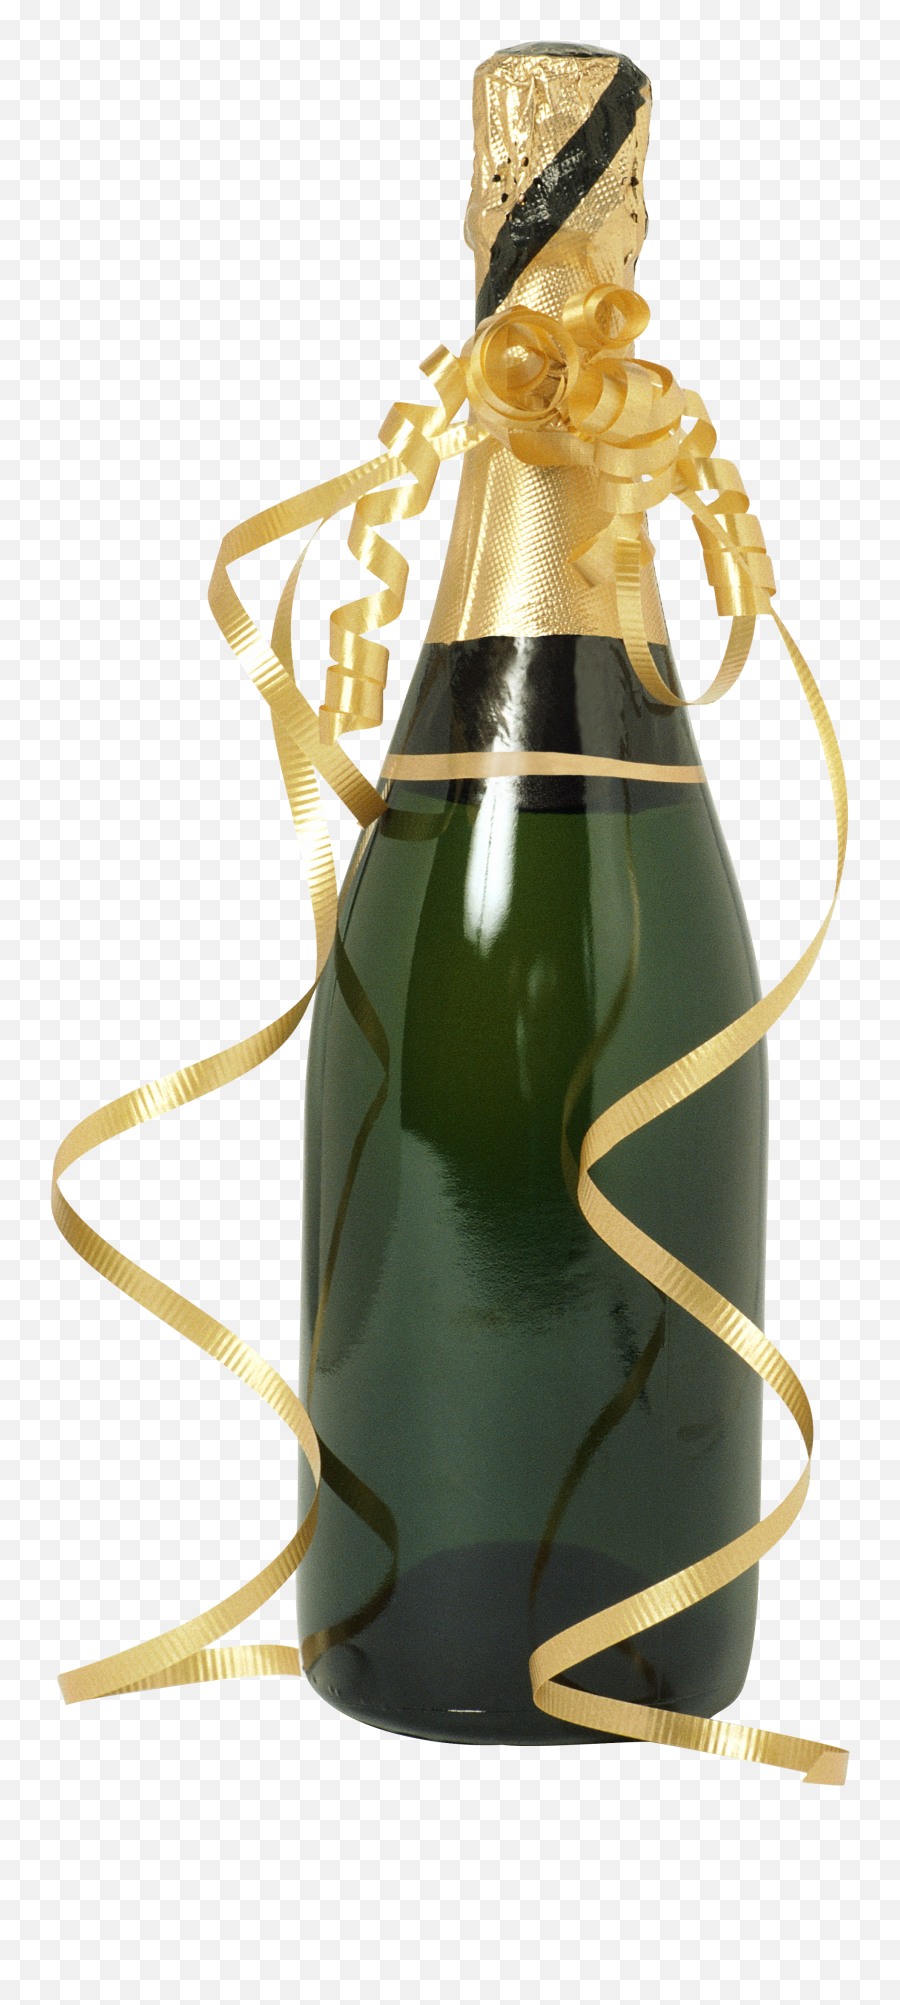 Champagne Png Bottle - Champagne Bottle And Glass Png Emoji,Champagne Bottle Emoji